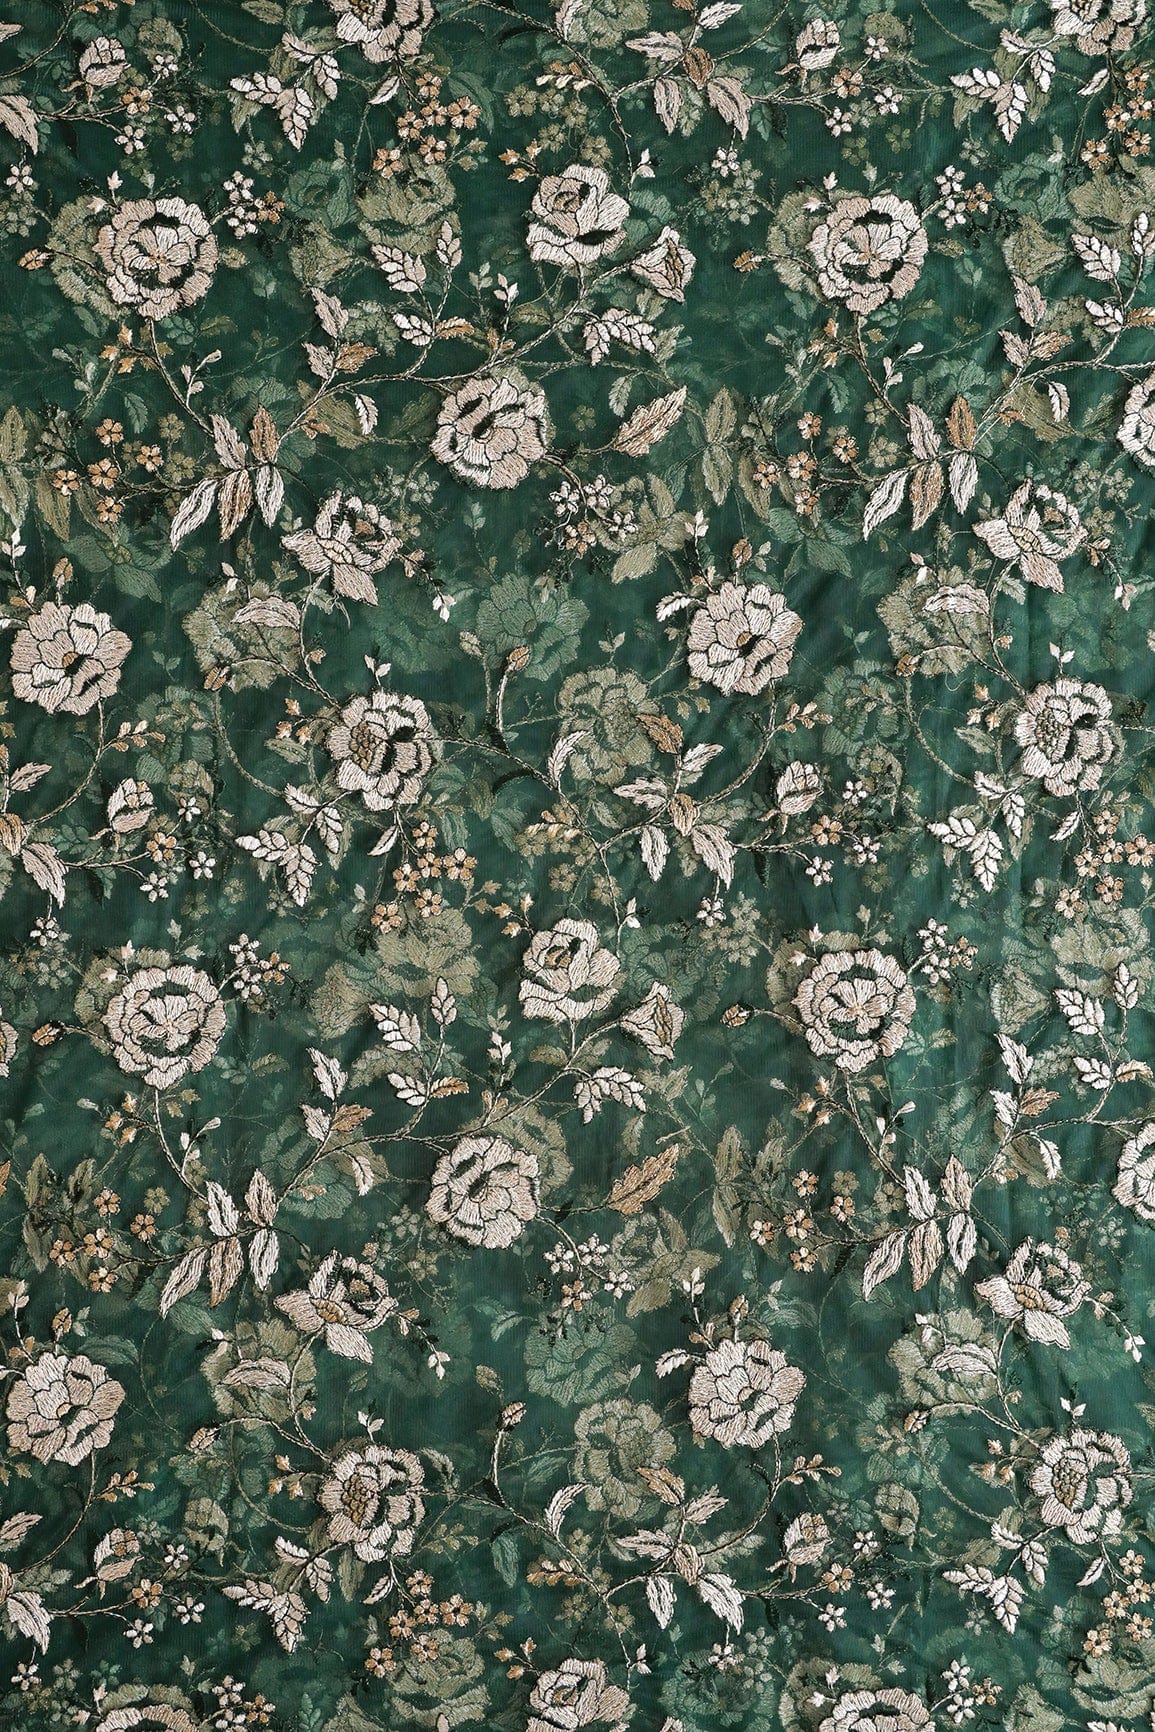 doeraa Embroidery Fabrics Heavy Floral Beige And Green Thread Work Embroidery On Green Soft Net Fabric